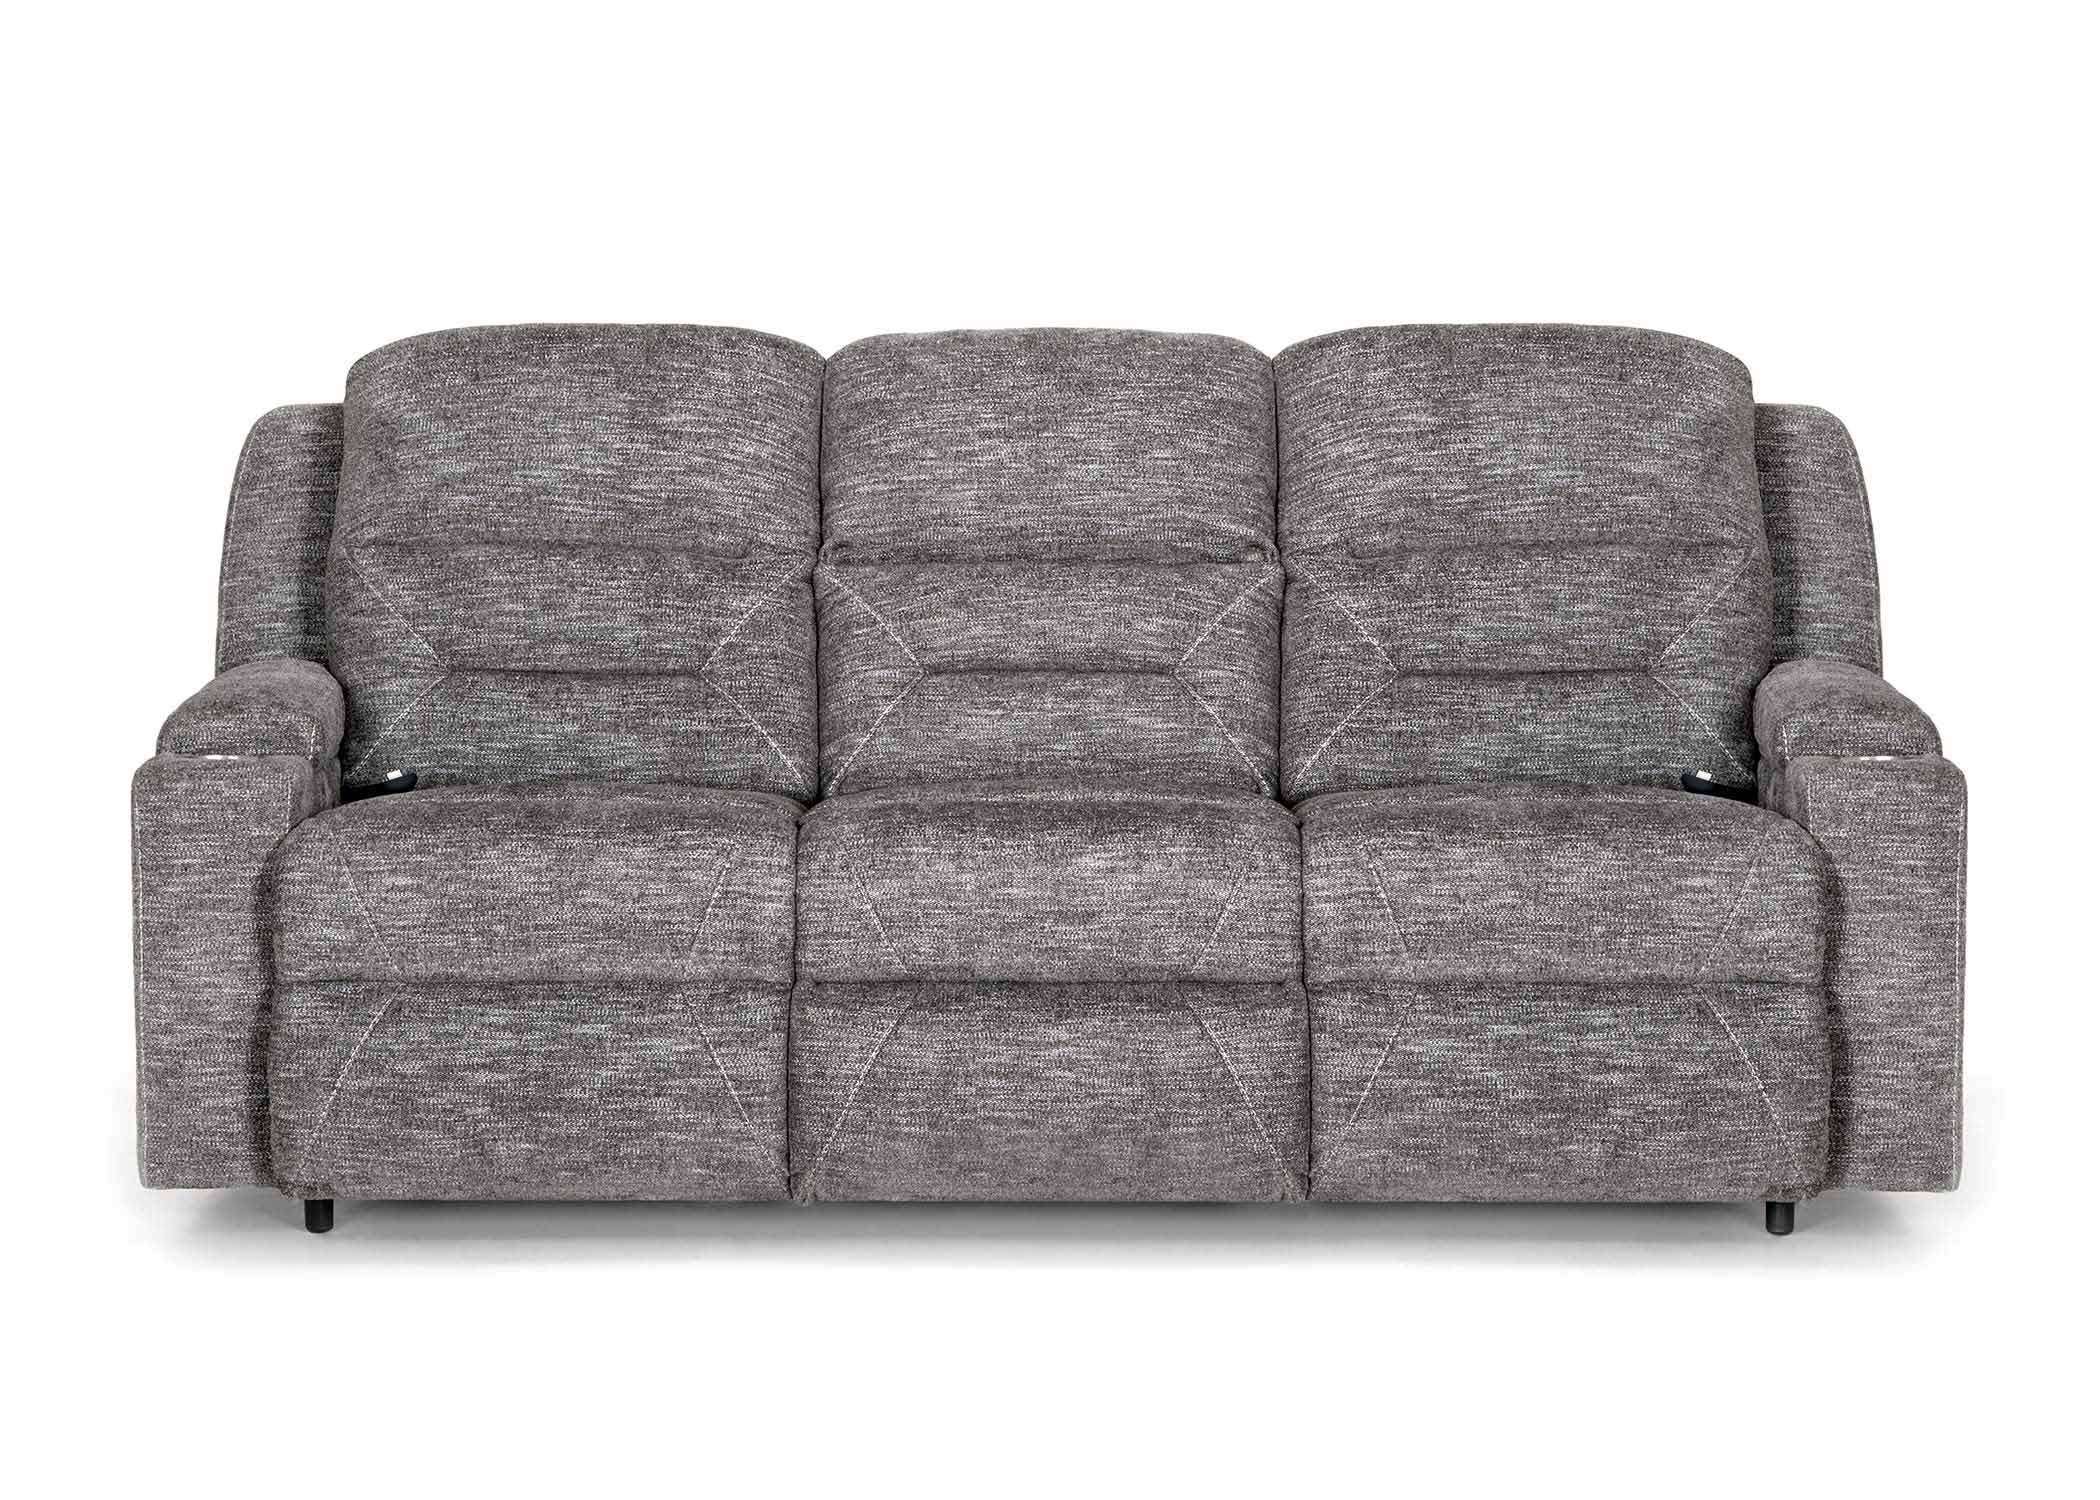  79847 Triple Power Reclining Sofa - Front View 